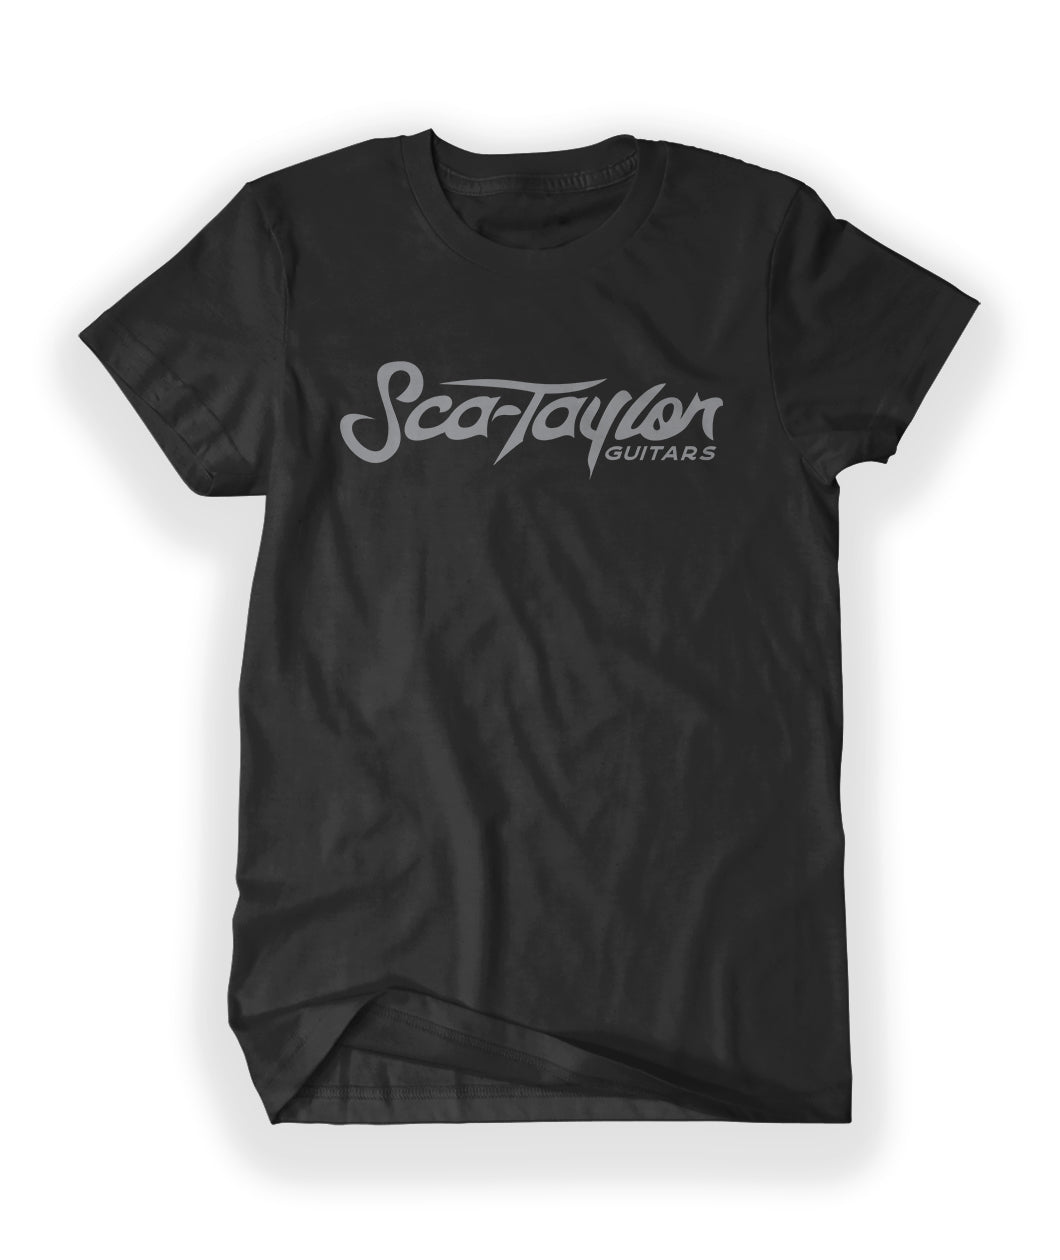 Black shirt with “Sca-Taylor” in gray organic cursive font. Below on the bottom right, “Guitars” is in gray organic font - from Rob Scallon